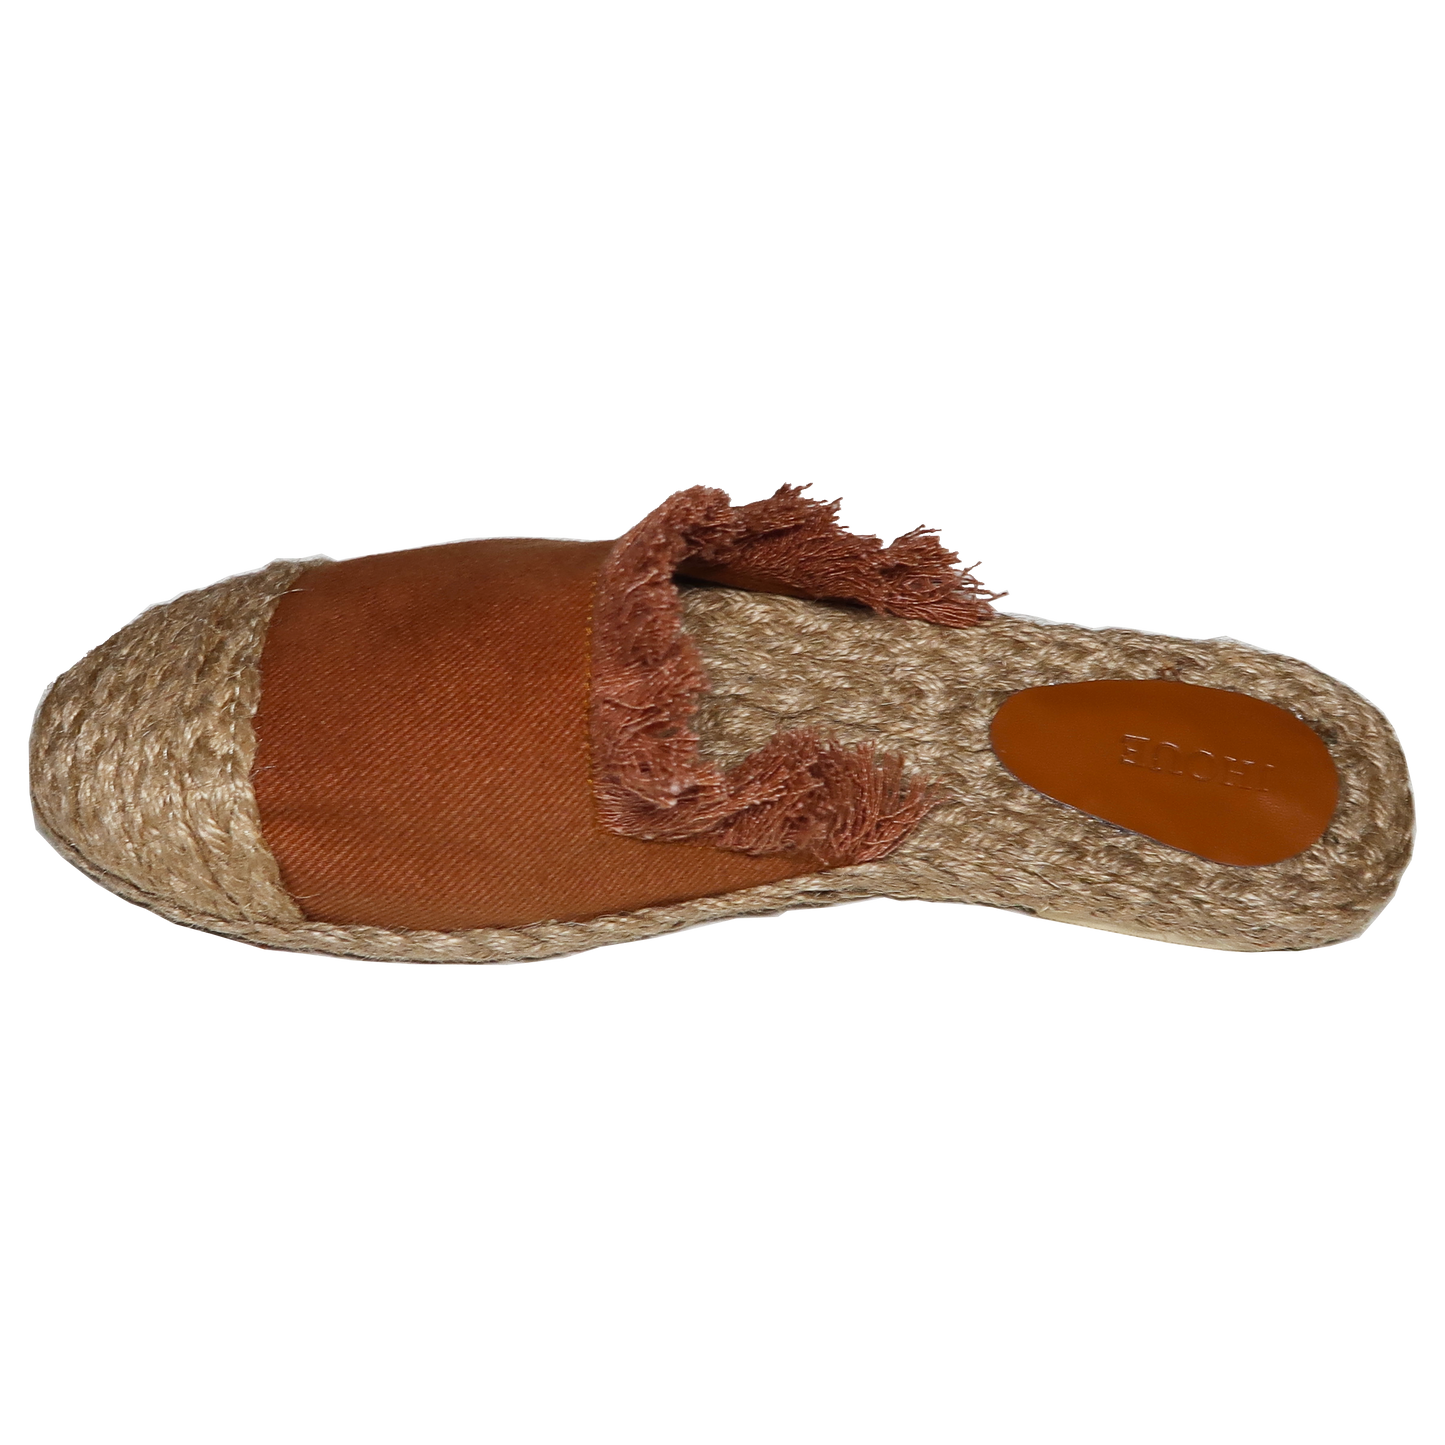 Handmade Abaca Insole Tan Ripped Canvas Sandals Slippers Flat Semi Pointed Toe Half Shoes